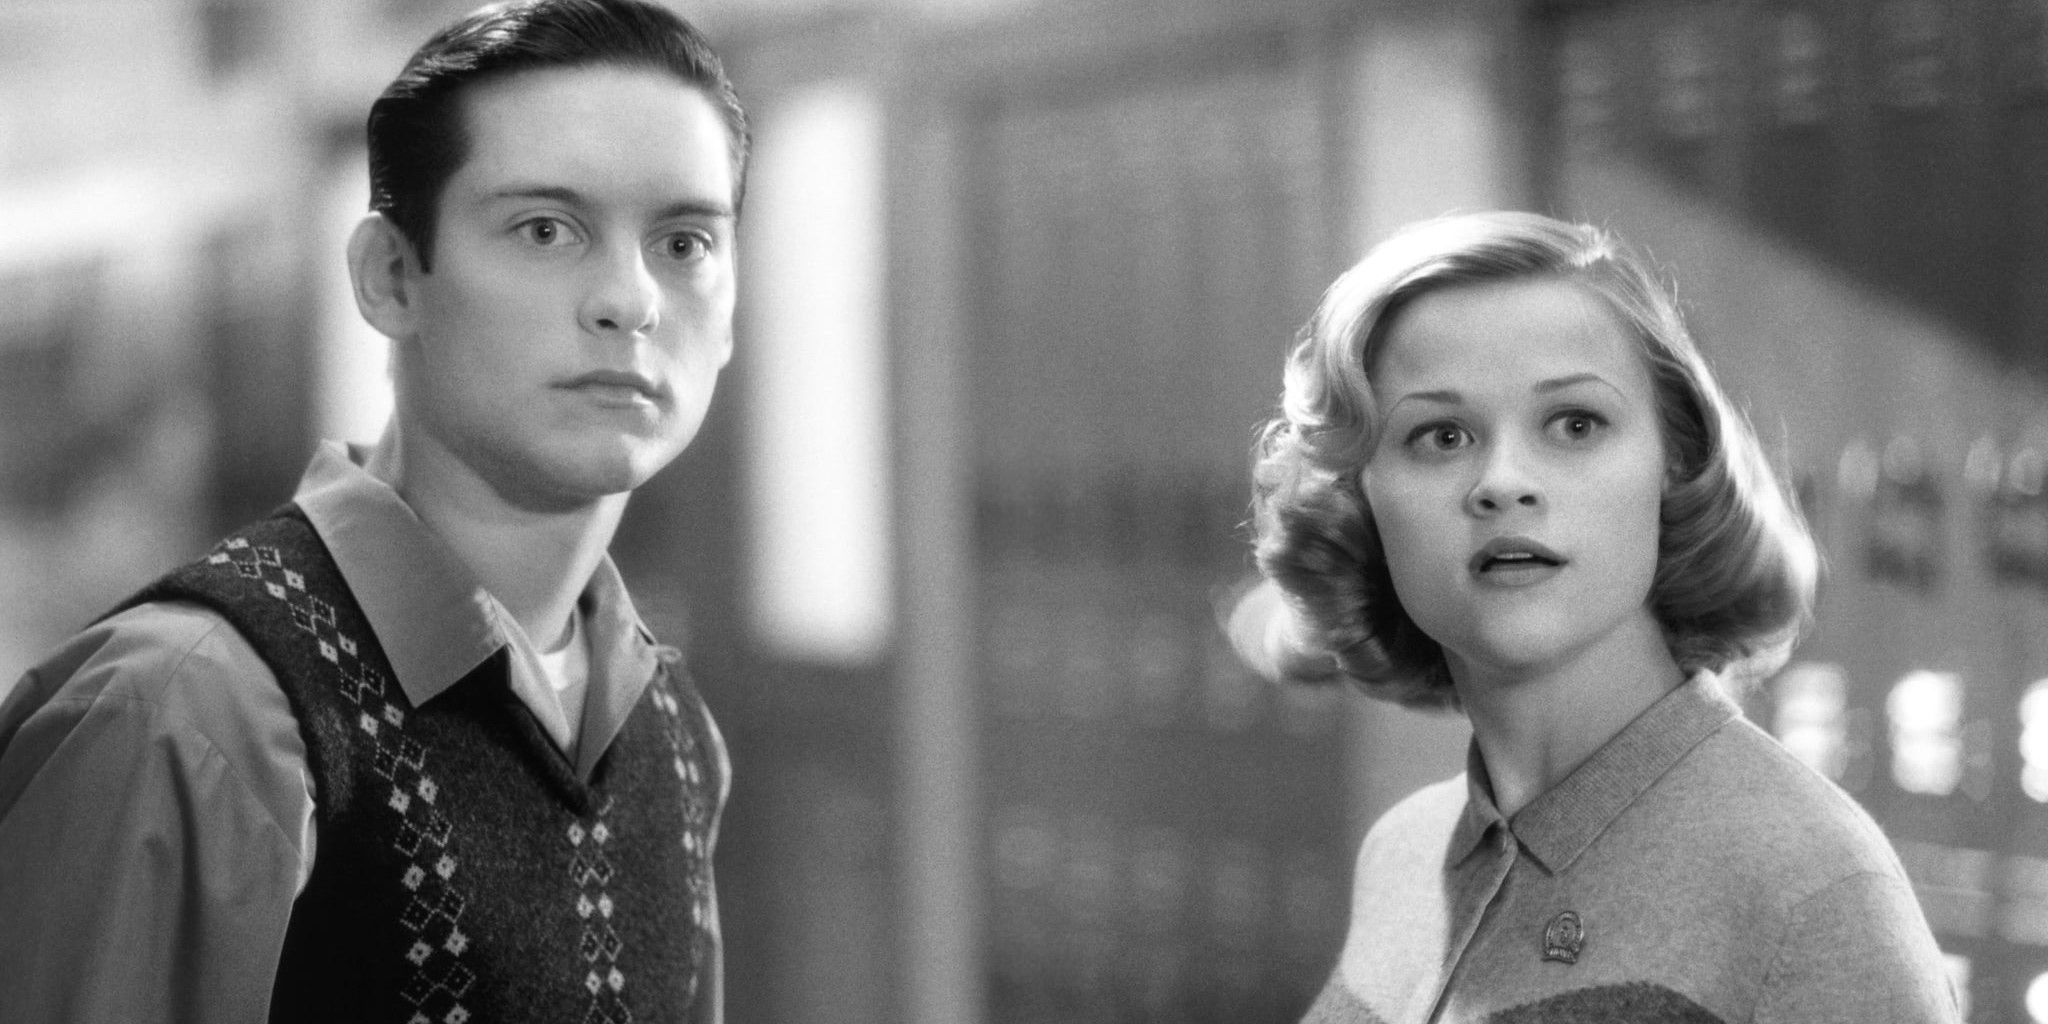 A scene from Pleasantville with Tobey Maguire and Reese Witherspoon.